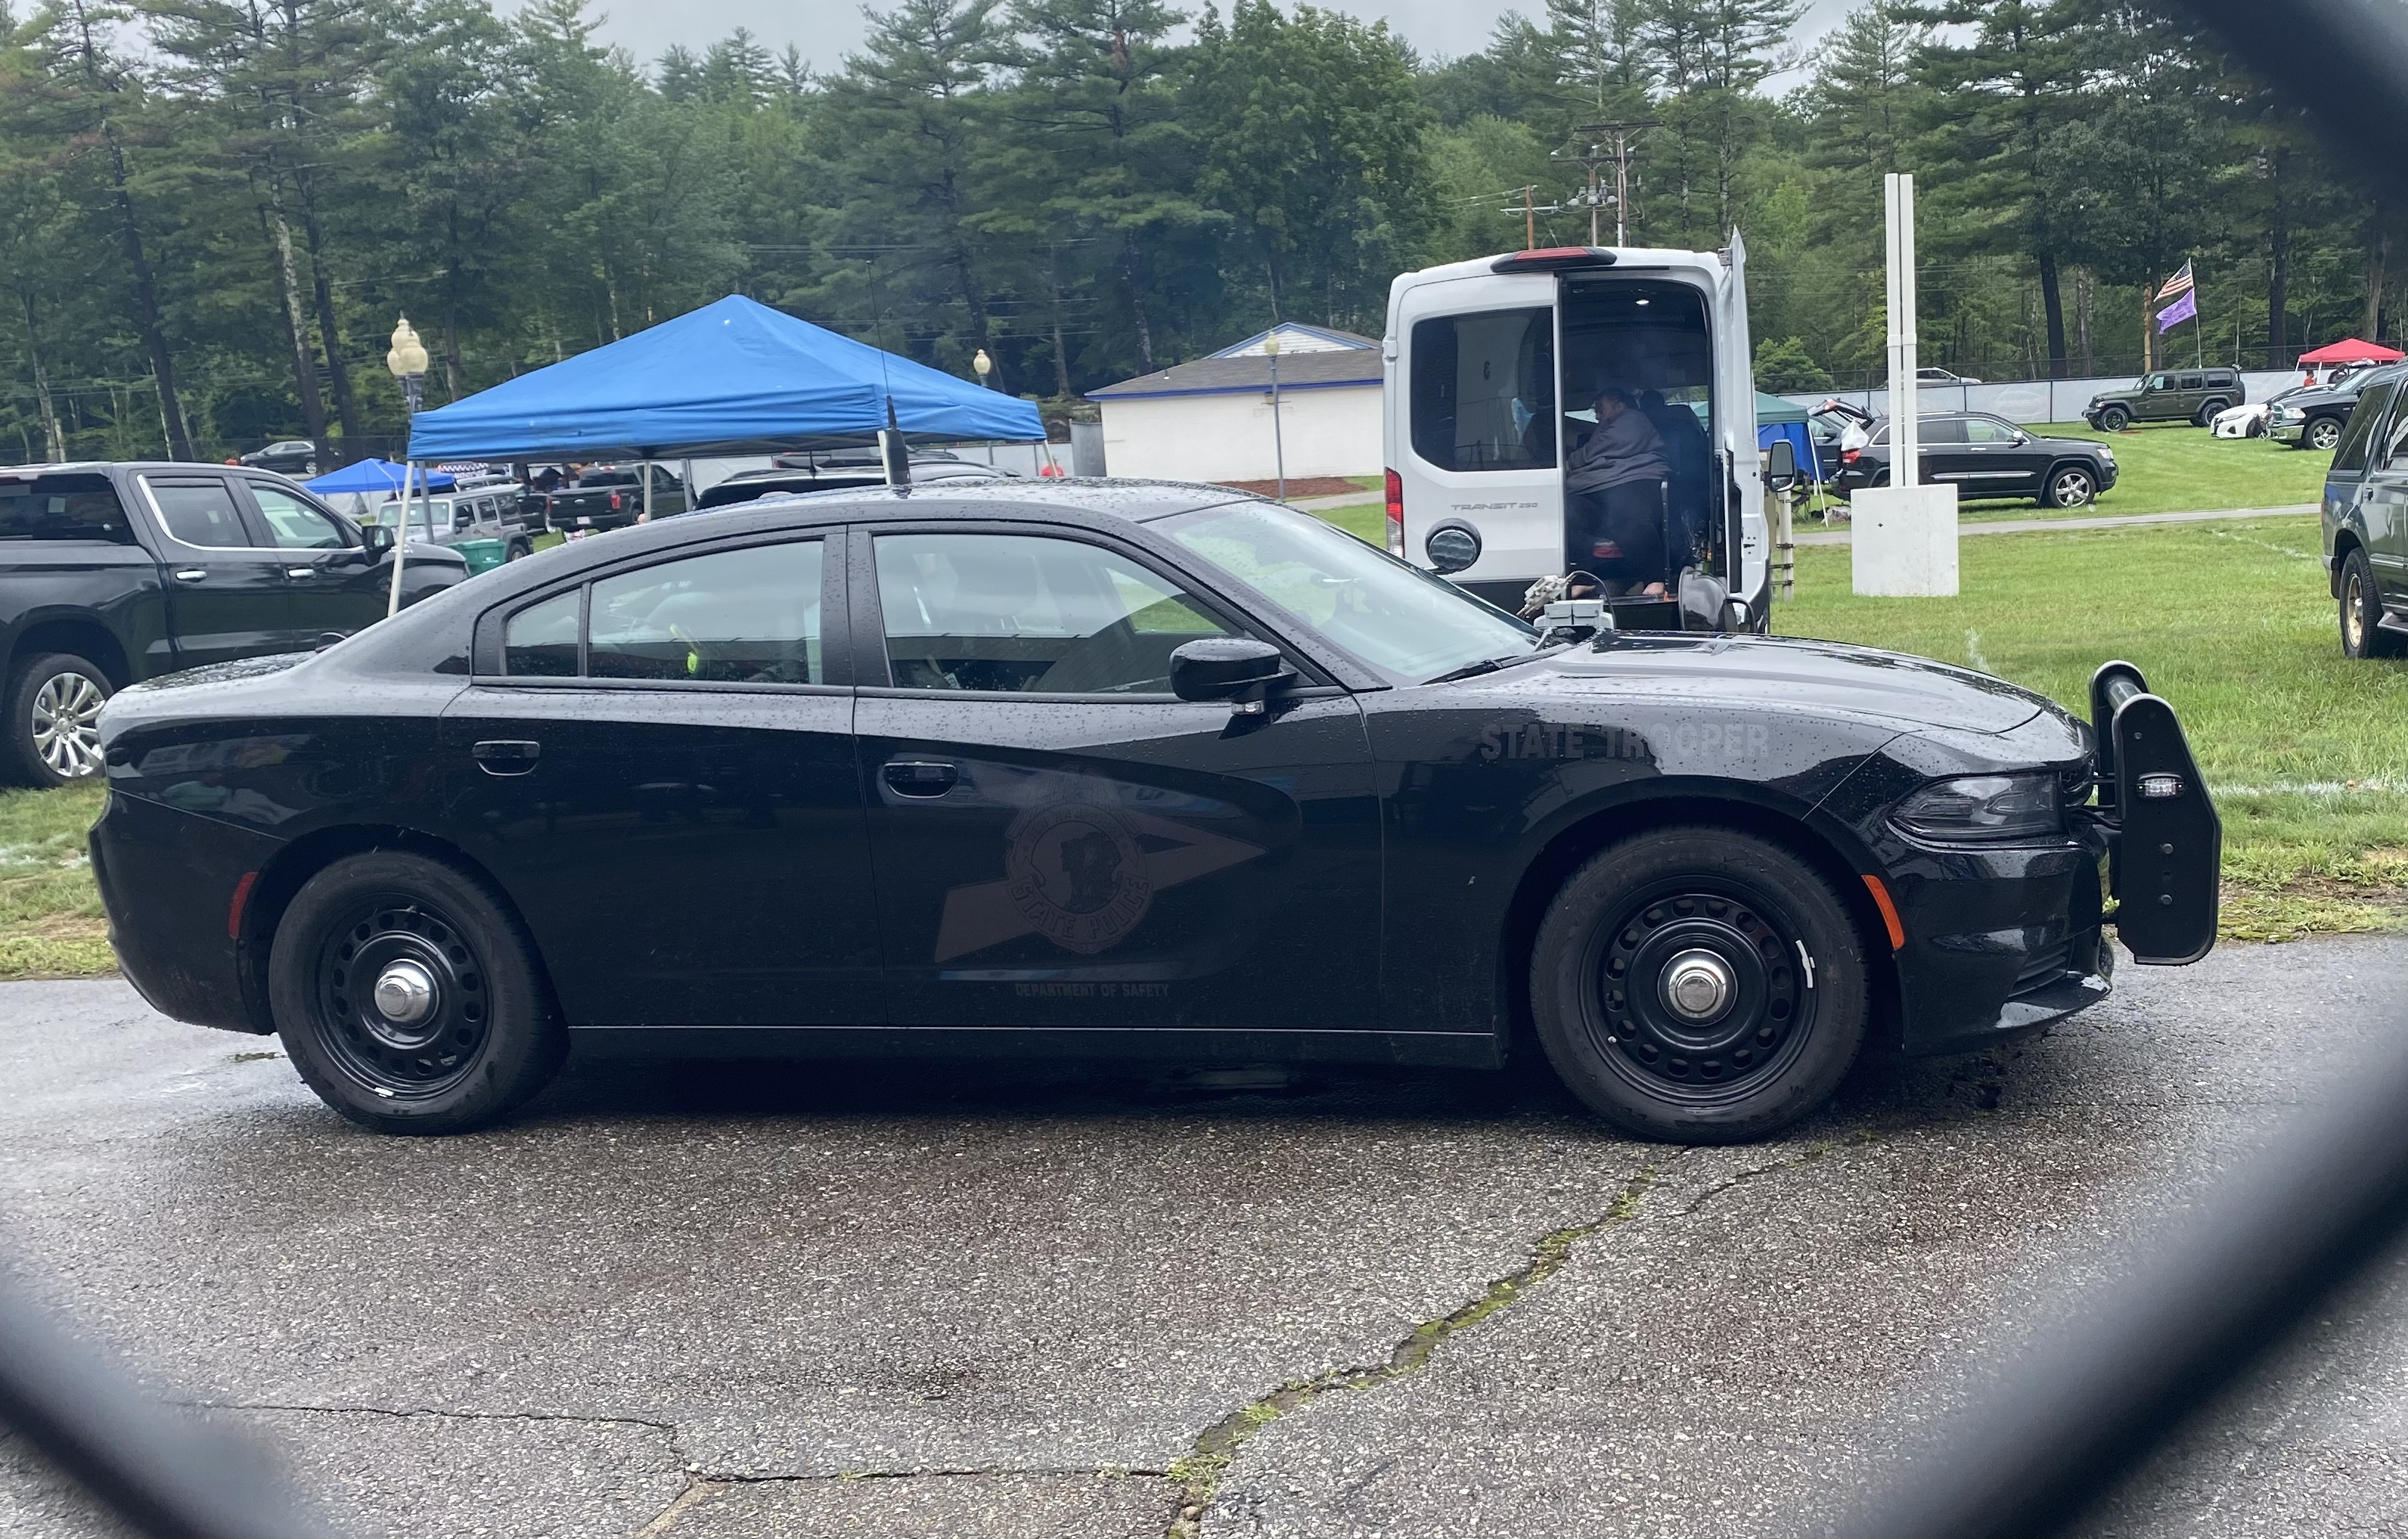 A photo  of New Hampshire State Police
            Cruiser 80, a 2017-2019 Dodge Charger             taken by @riemergencyvehicles